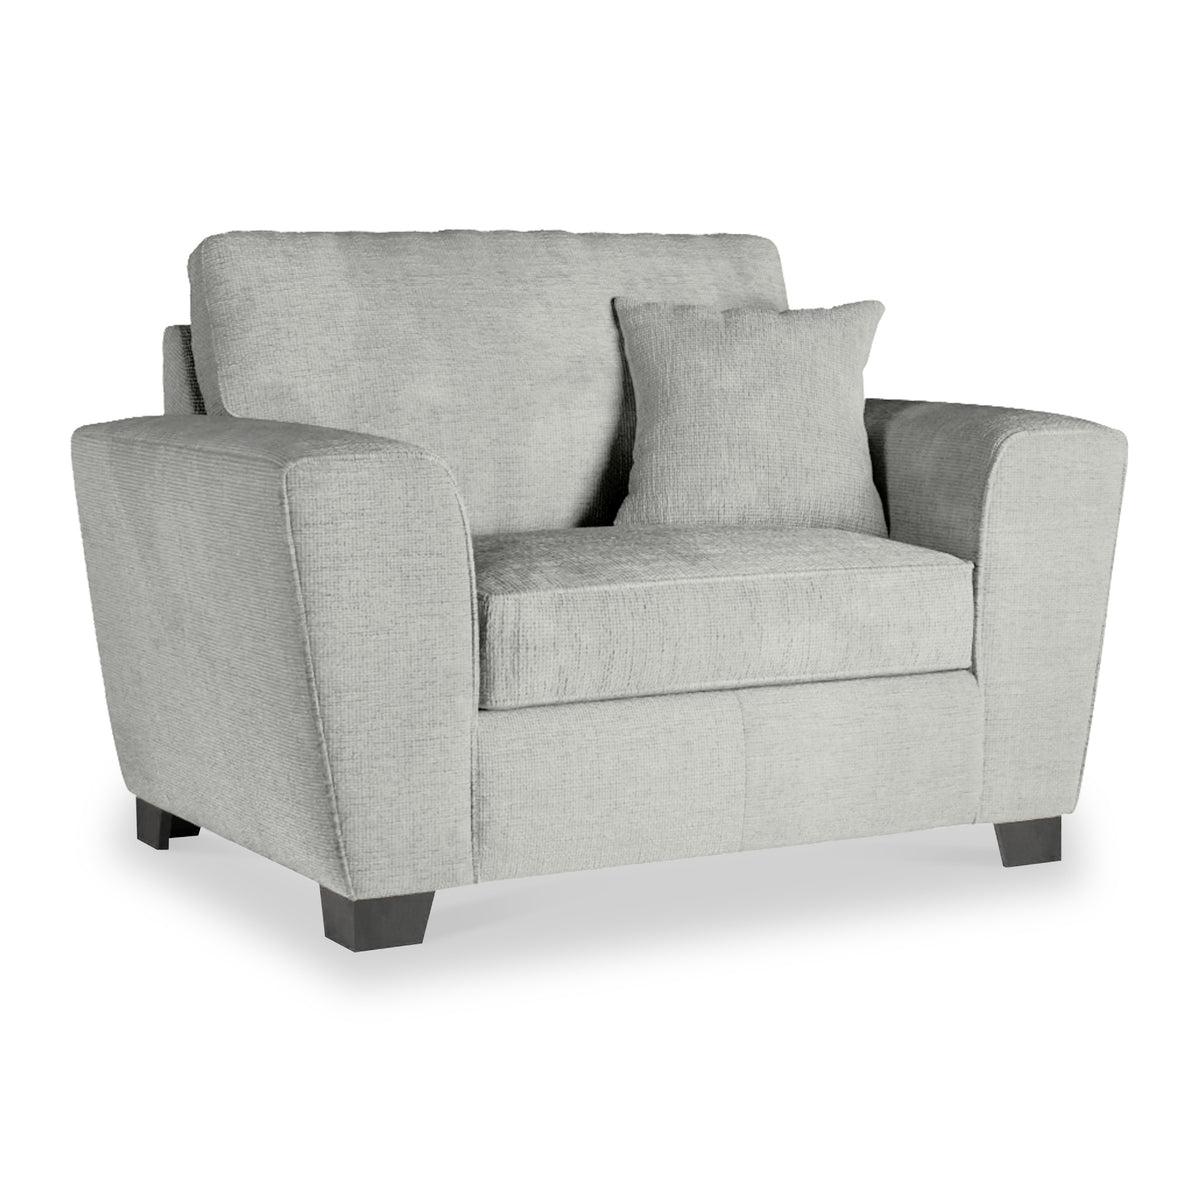 Chester Silver  Hopsack Snuggler Armchair from Roseland Furniture